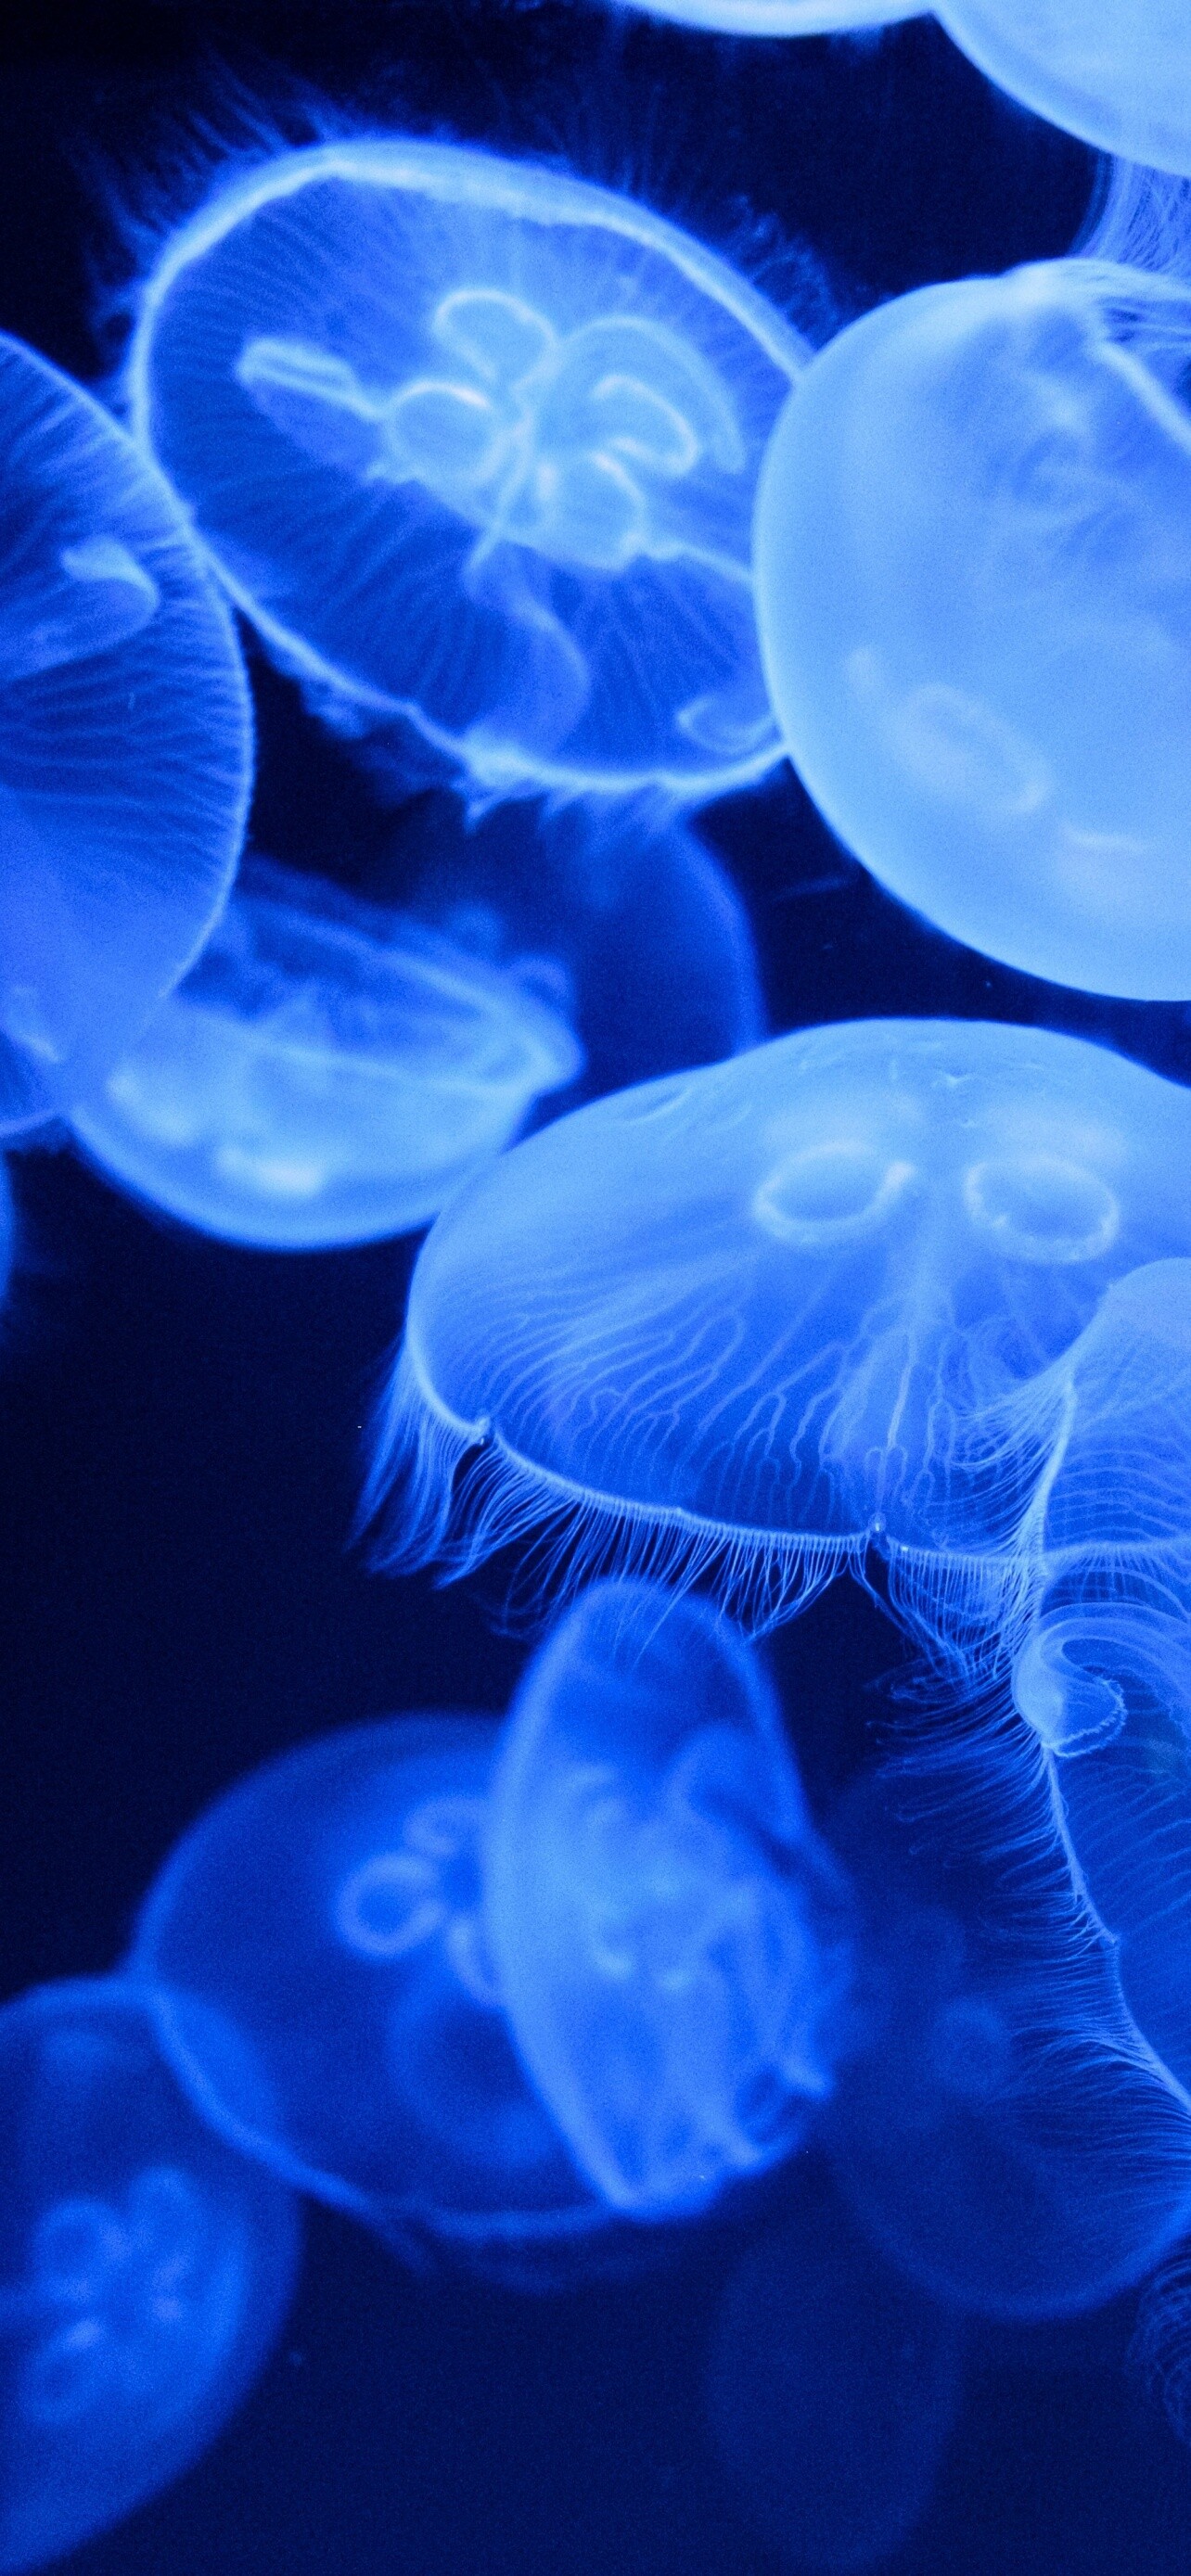 Glowing Jellyfish: Medusa, An adult, bell-shaped, floating jellies, Common ocean animals. 1290x2780 HD Background.